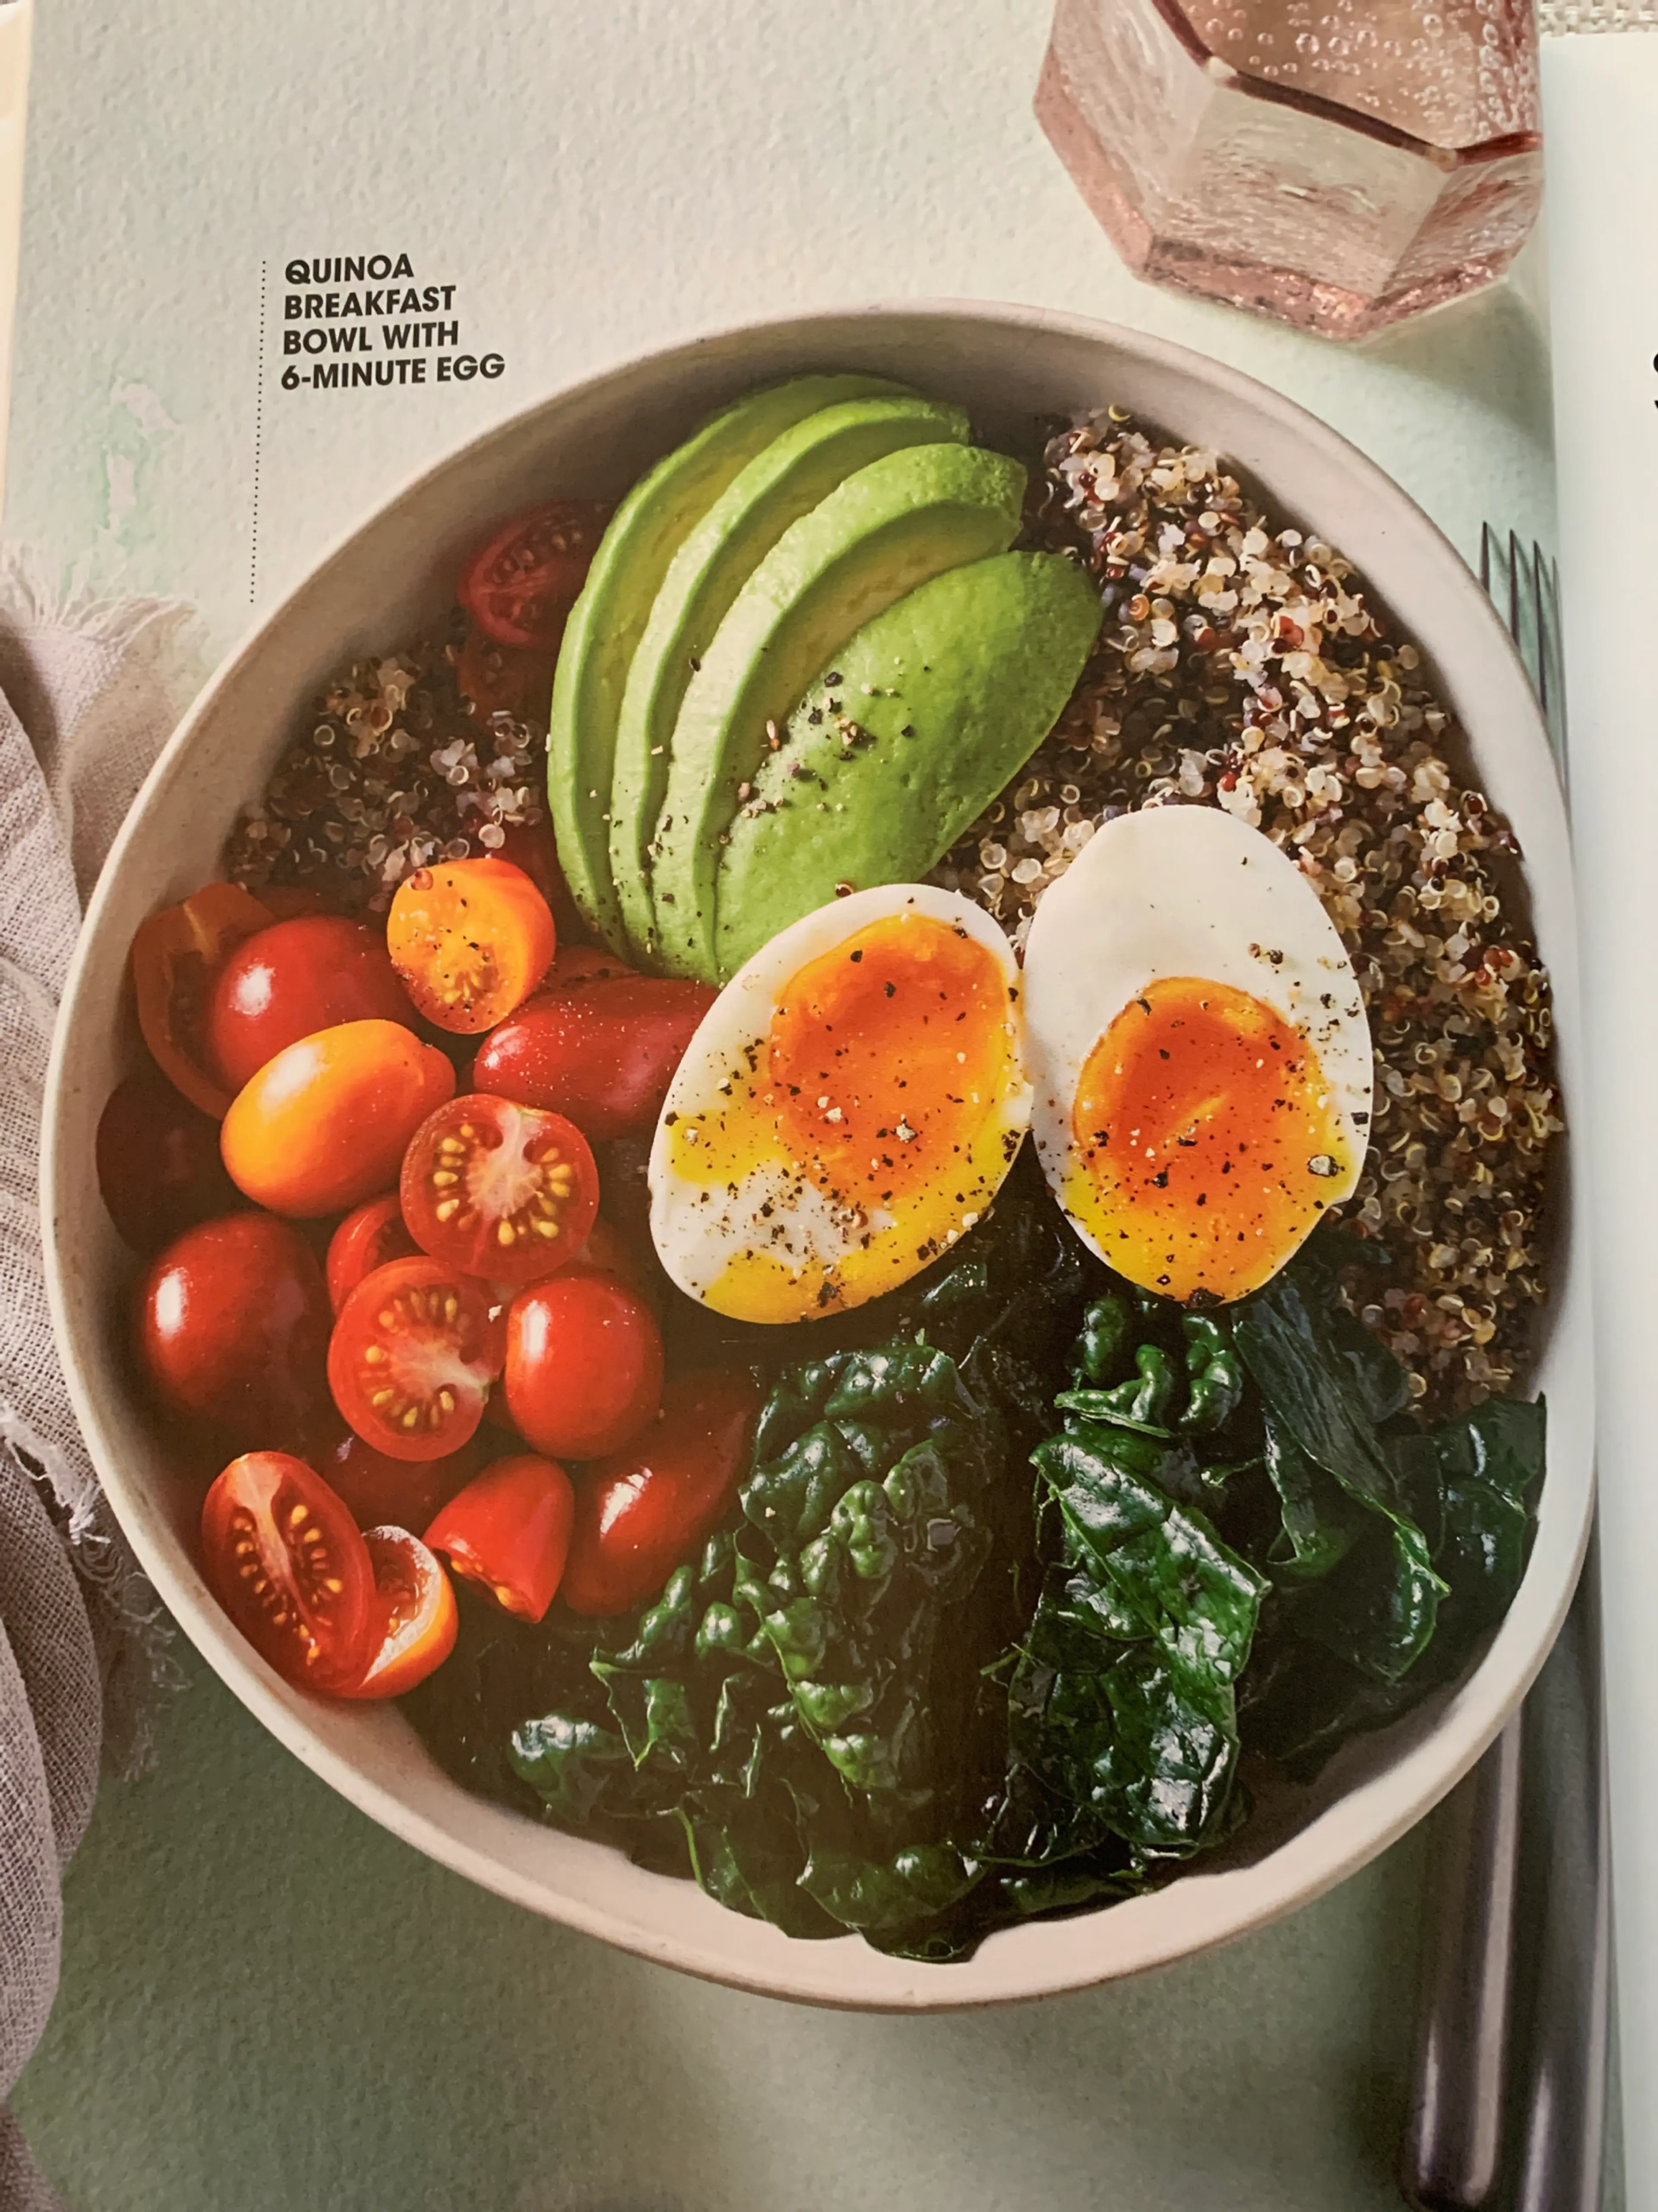 Quinoa Breakfast Bowl with 6-Minute Egg